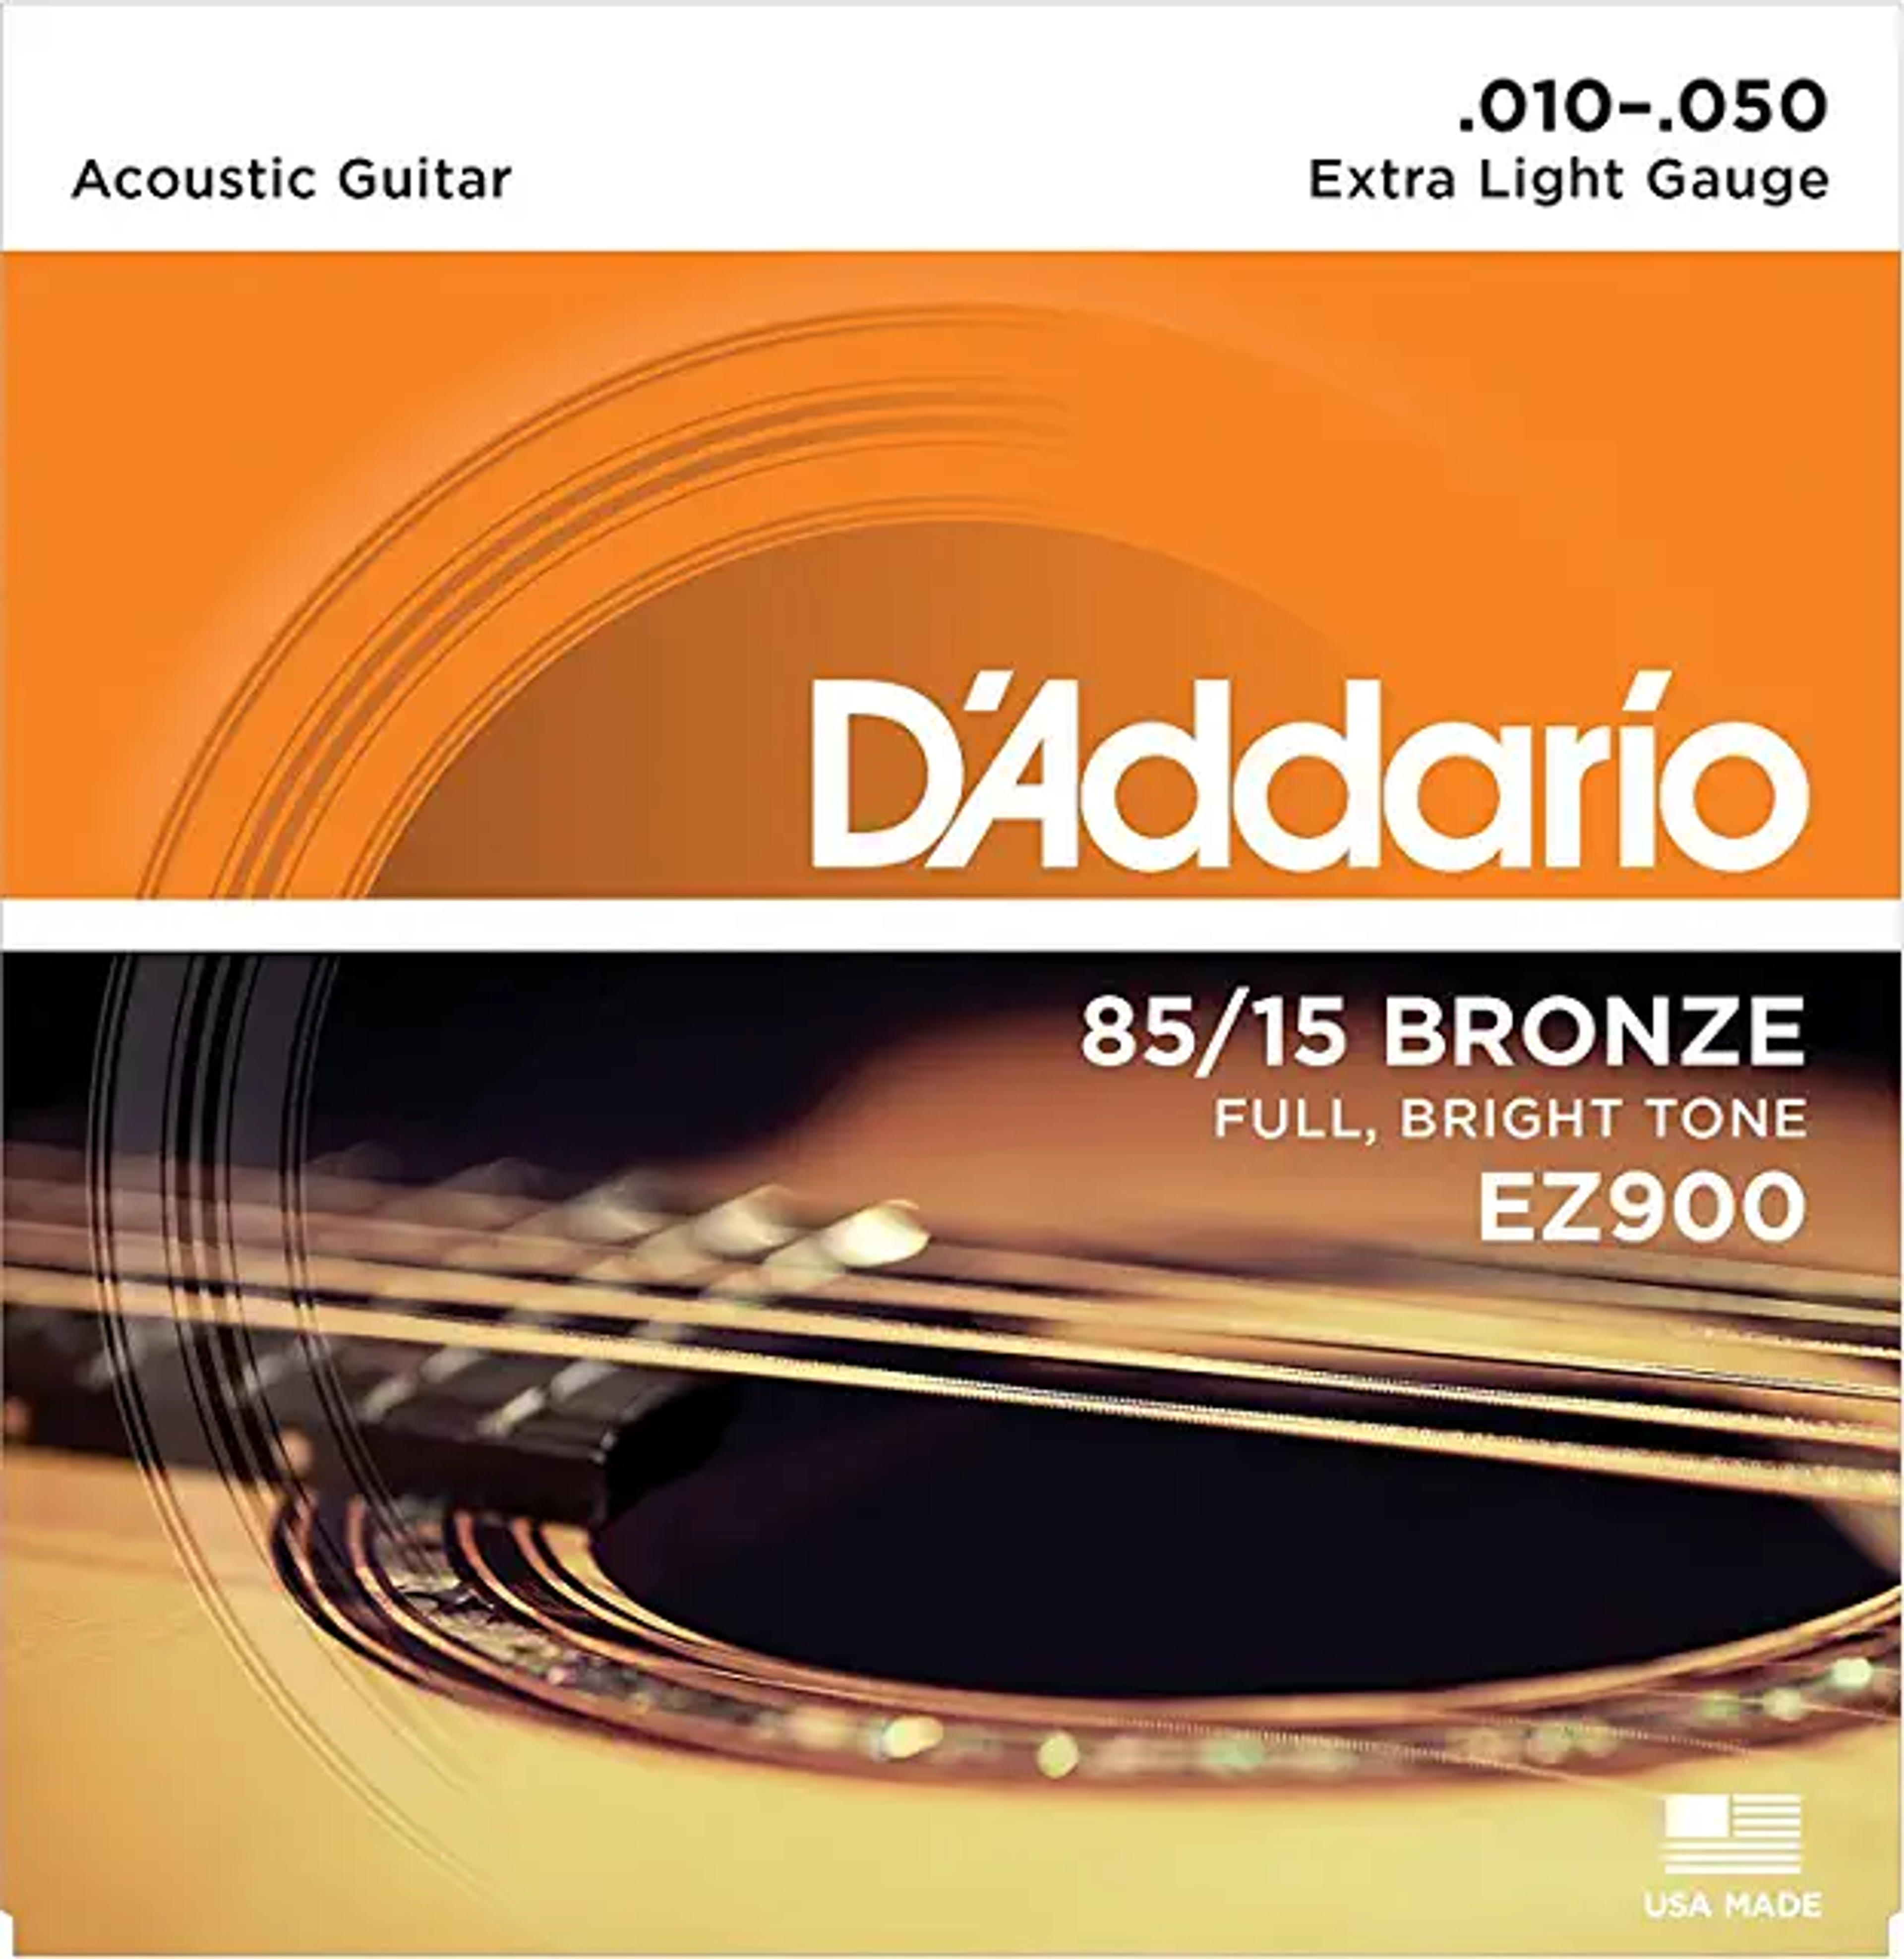 D'Addario Bronze Acoustic Guitar Strings_{.010-.050_Extra Light Gauge}_Stainless Steel Material